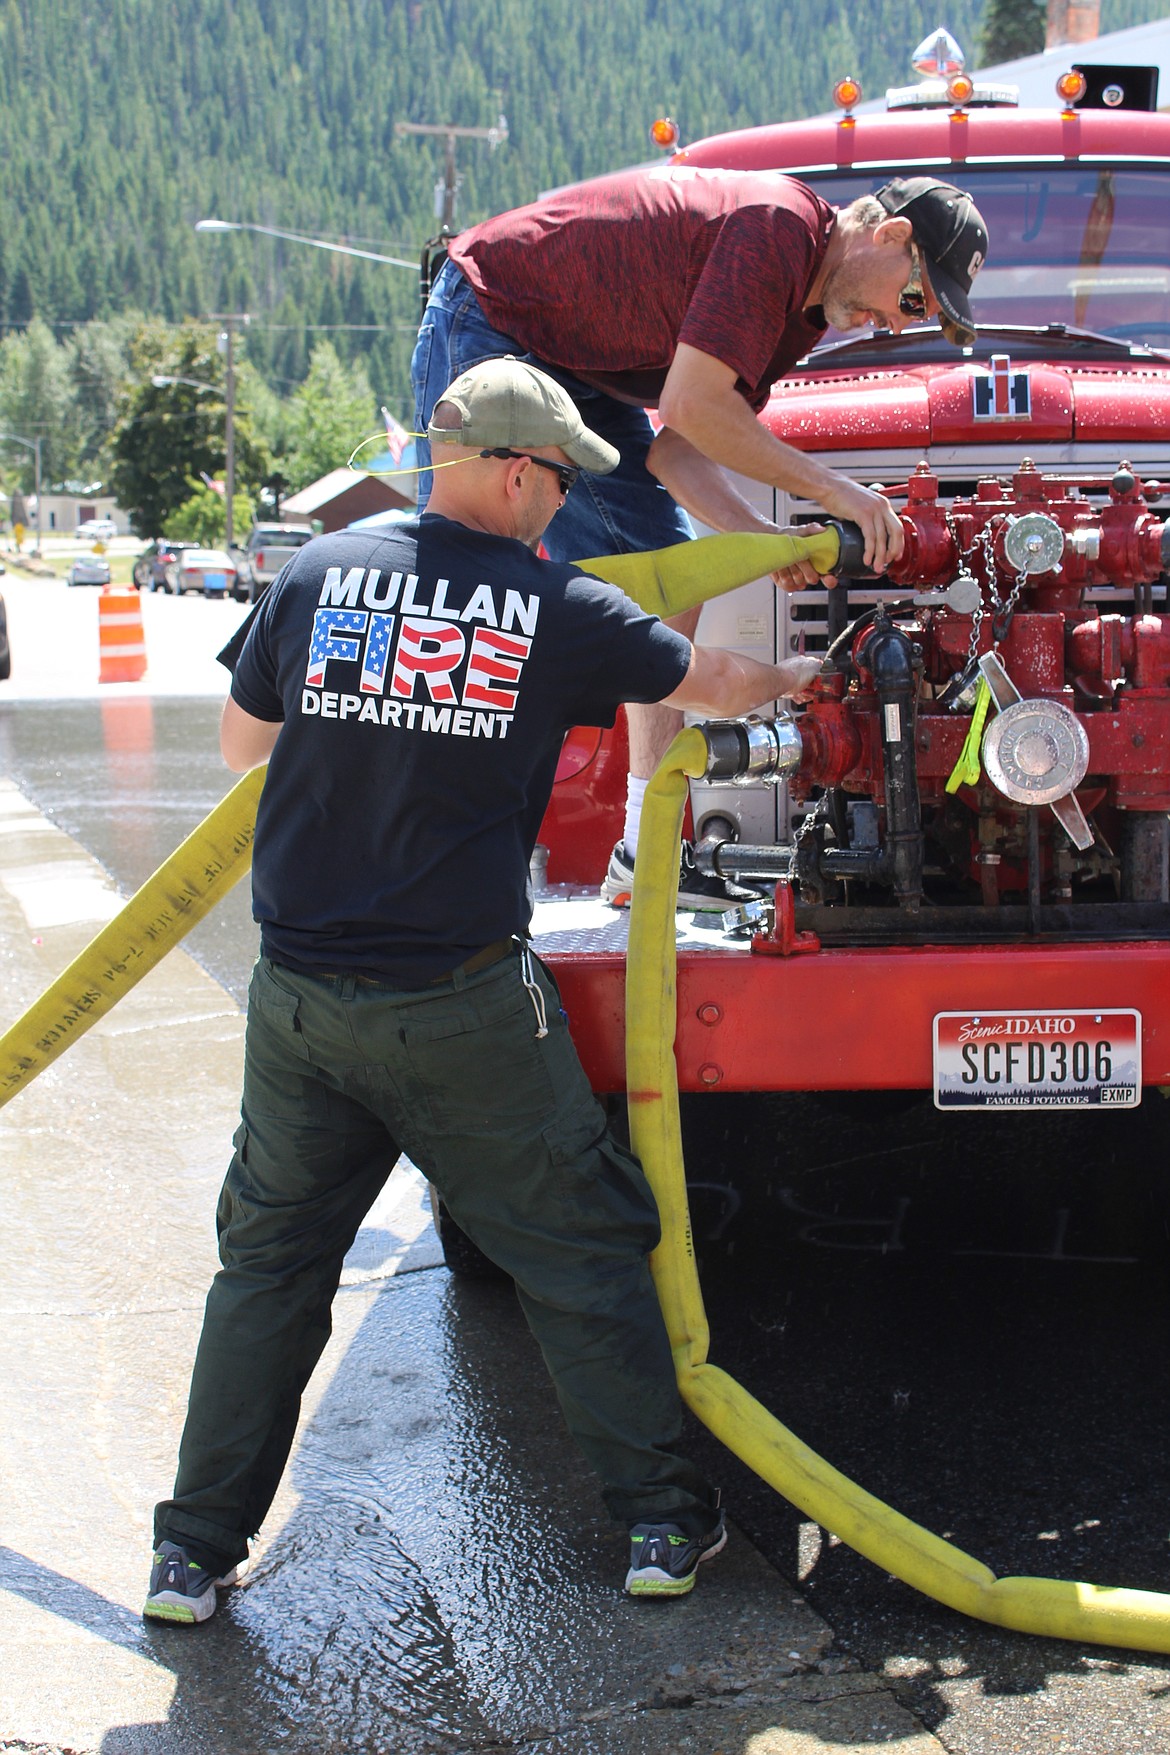 Kjell Truesdell and Chris Morris screw on hoses to the old Mullan Firetruck during the vehicle part of the Make-n-Break relay. This second part of the relay is more difficult than the first, as participants must funnel water through the truck instead of simply getting it from a hydrant.